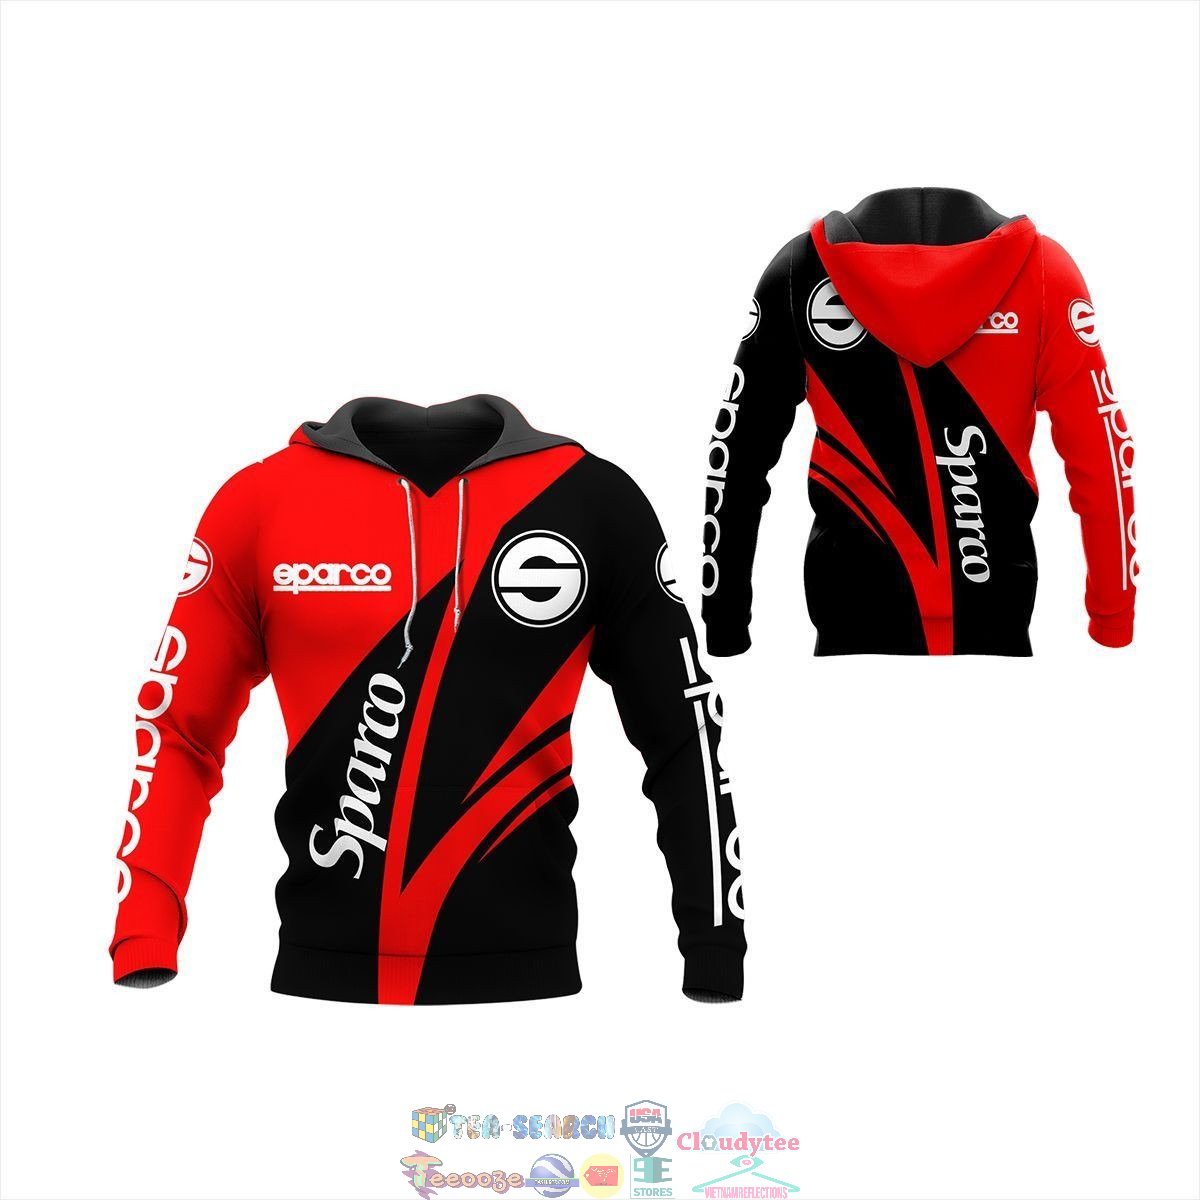 Sparco ver 66 3D hoodie and t-shirt – Saleoff